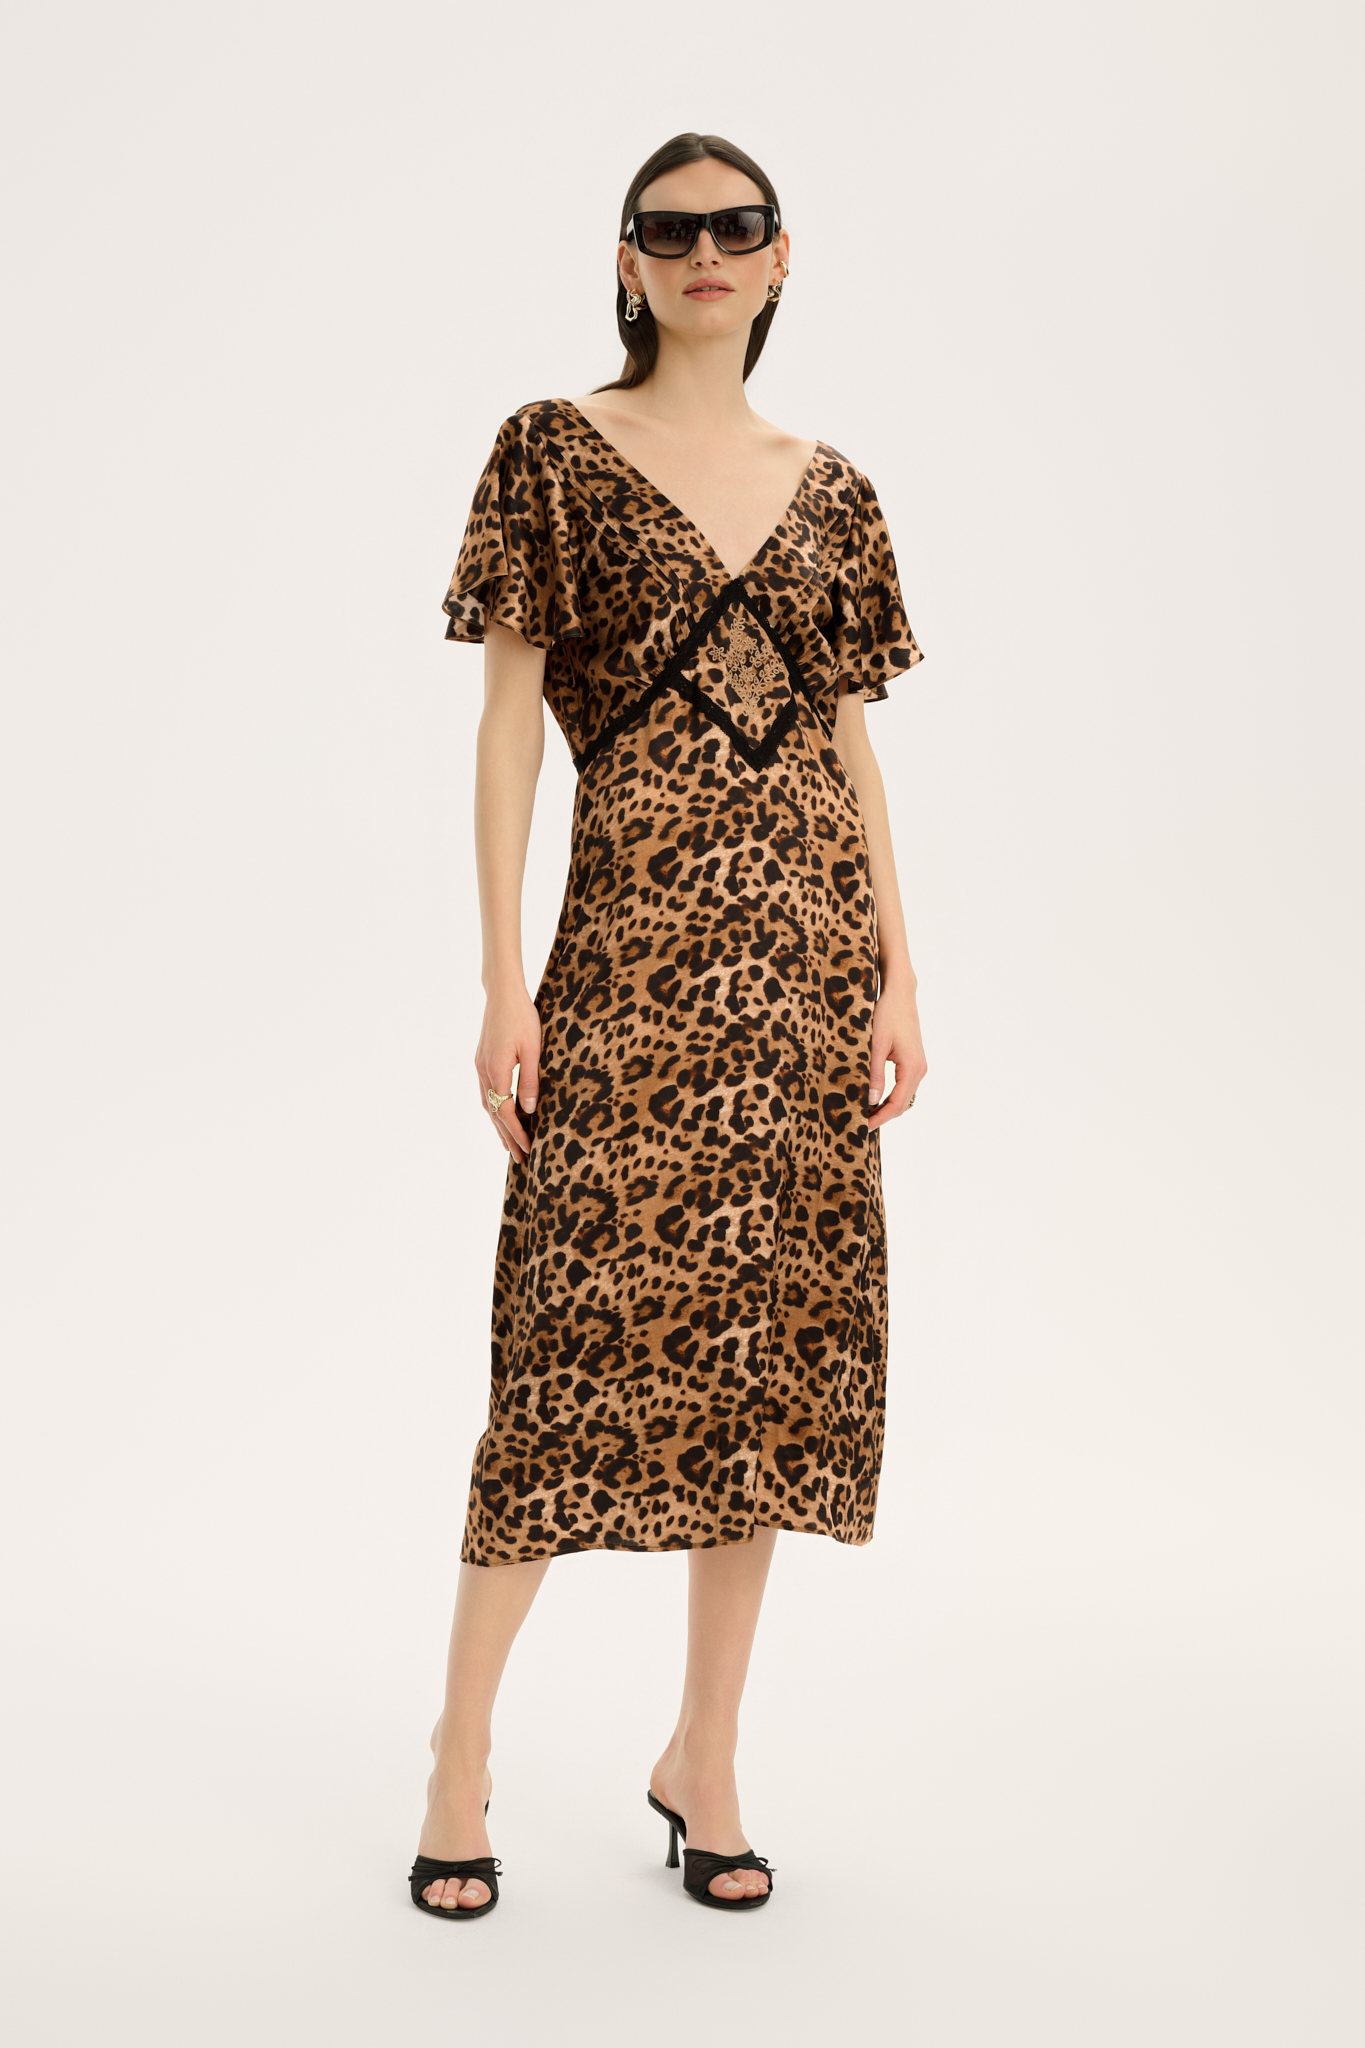 SILK DRESS WITH EMBROIDERY IN LEO PRINT